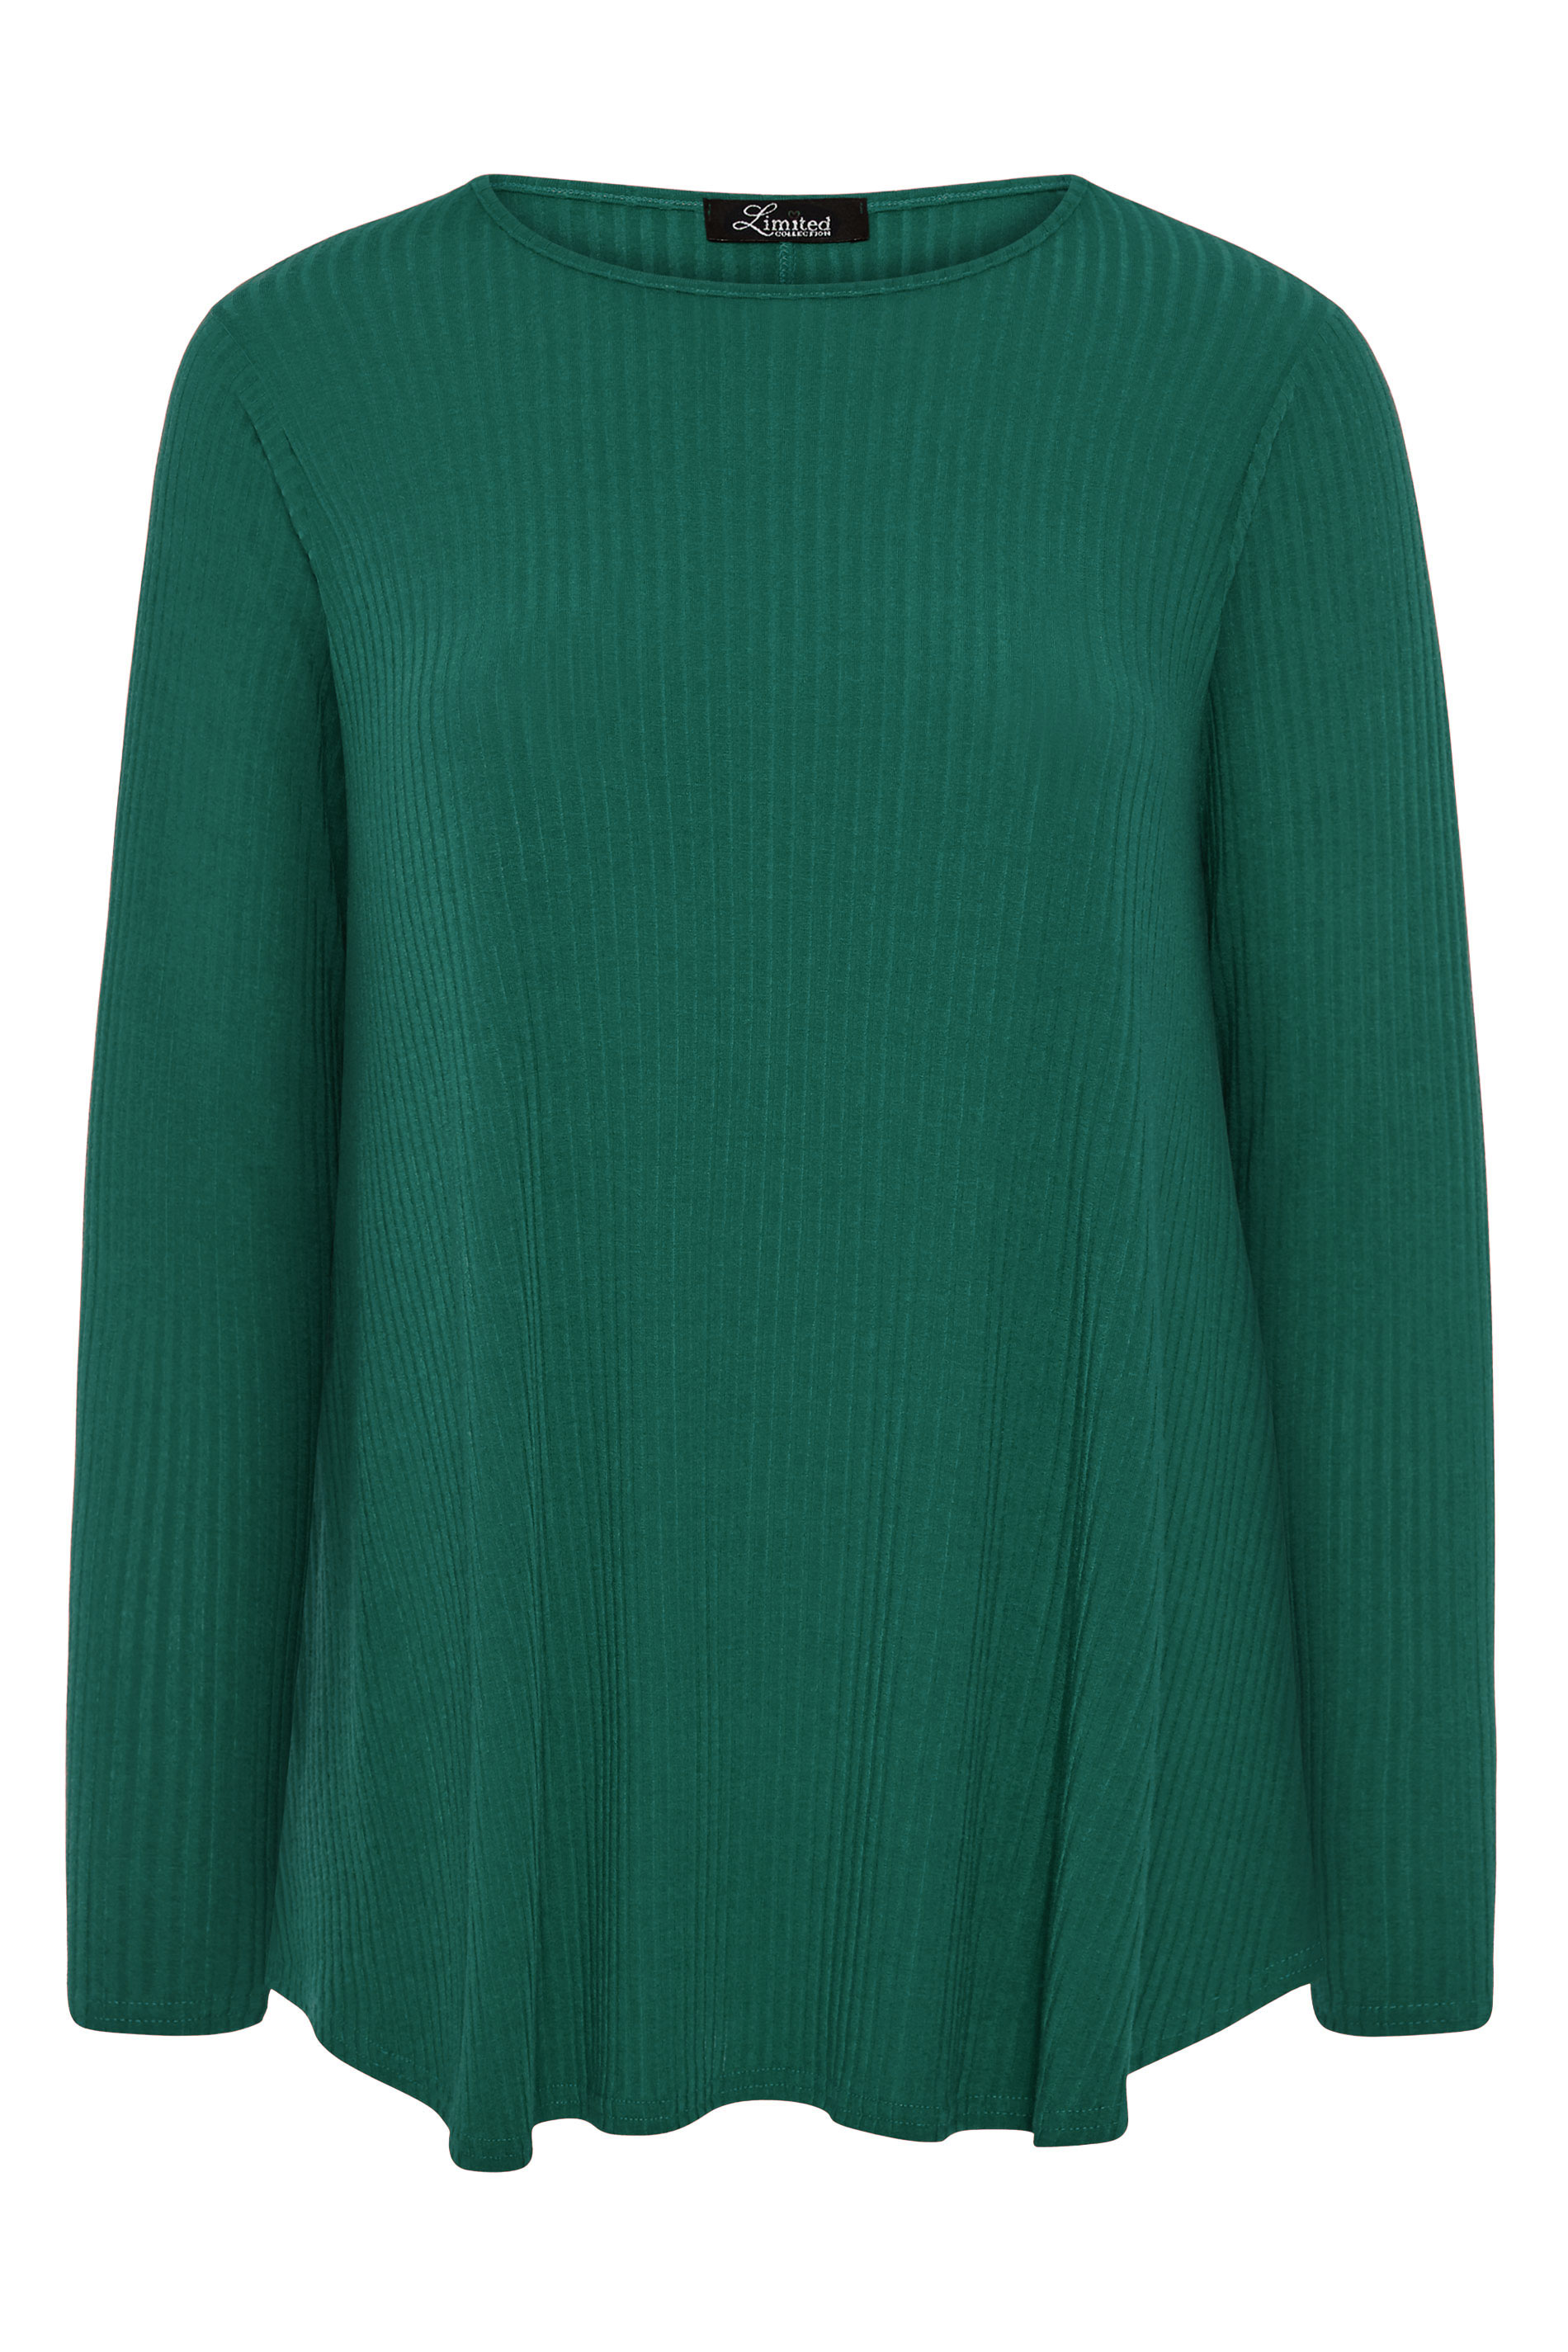 LIMITED COLLECTION Forest Green Ribbed Long Sleeve Top | Yours Clothing